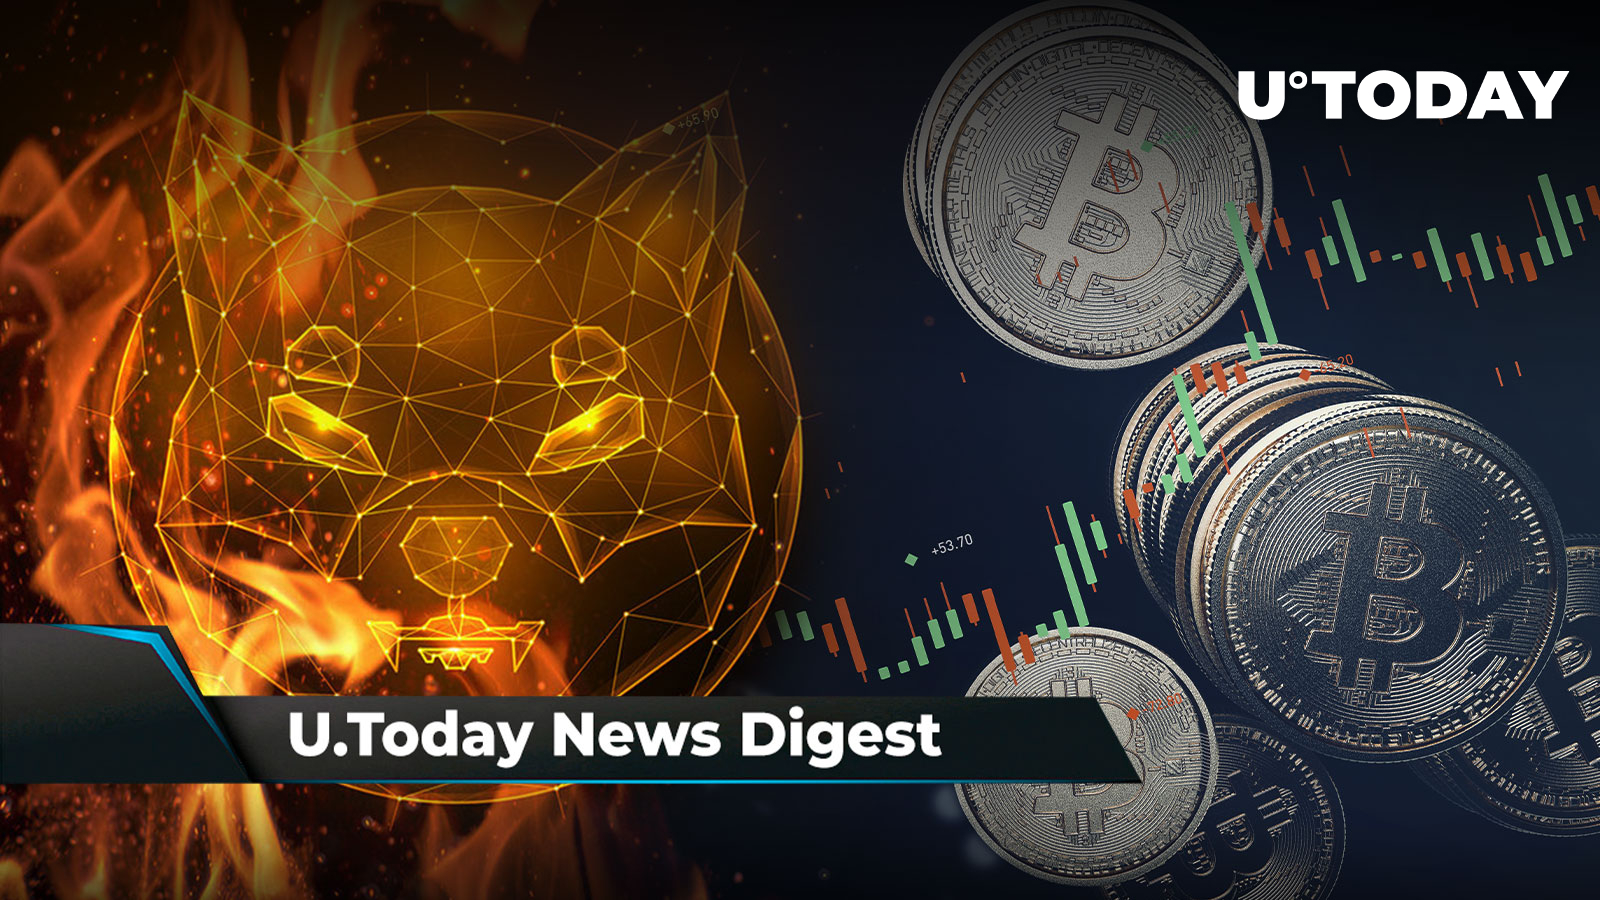 Lead SHIB Dev Urges Getting Popcorn Ready, Pro Ripple Lawyer Comments on SHIB Burn Estimates, BTC Completes ‘Extremely Rare’ Pattern: Crypto News Digest by U.Today